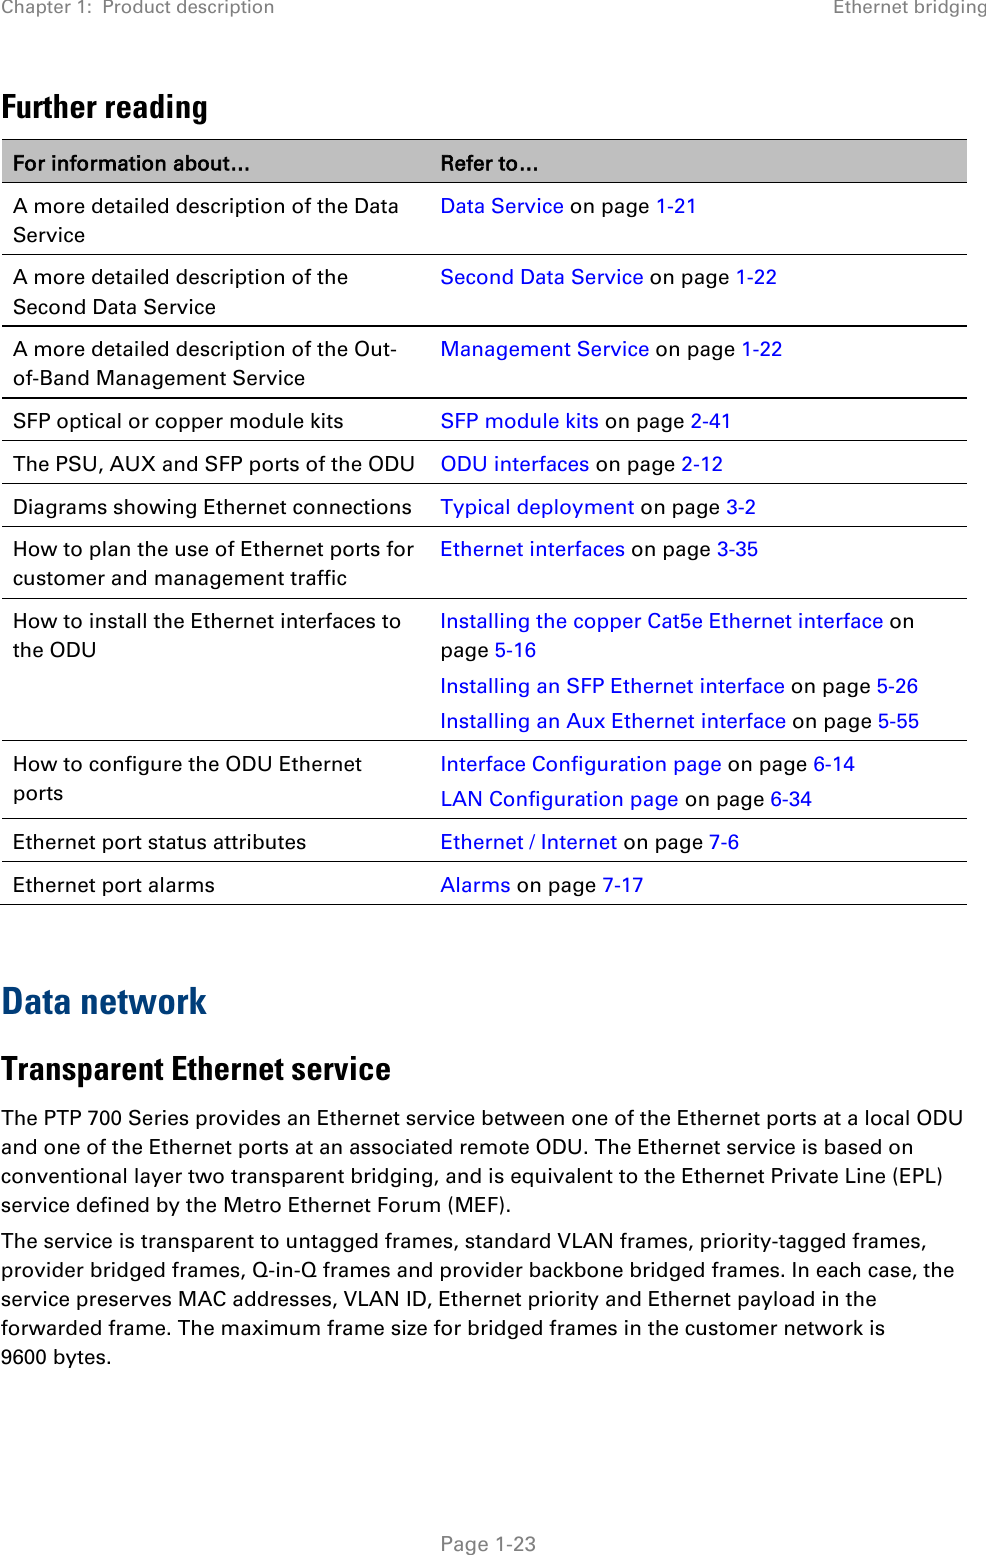 Chapter 1:  Product description Ethernet bridging  Further reading For information about… Refer to… A more detailed description of the Data Service Data Service on page 1-21 A more detailed description of the Second Data Service Second Data Service on page 1-22 A more detailed description of the Out-of-Band Management Service Management Service on page 1-22 SFP optical or copper module kits SFP module kits on page 2-41 The PSU, AUX and SFP ports of the ODU ODU interfaces on page 2-12 Diagrams showing Ethernet connections Typical deployment on page 3-2 How to plan the use of Ethernet ports for customer and management traffic Ethernet interfaces on page 3-35  How to install the Ethernet interfaces to the ODU Installing the copper Cat5e Ethernet interface on page 5-16 Installing an SFP Ethernet interface on page 5-26 Installing an Aux Ethernet interface on page 5-55 How to configure the ODU Ethernet ports Interface Configuration page on page 6-14 LAN Configuration page on page 6-34 Ethernet port status attributes Ethernet / Internet on page 7-6 Ethernet port alarms Alarms on page 7-17  Data network Transparent Ethernet service The PTP 700 Series provides an Ethernet service between one of the Ethernet ports at a local ODU and one of the Ethernet ports at an associated remote ODU. The Ethernet service is based on conventional layer two transparent bridging, and is equivalent to the Ethernet Private Line (EPL) service defined by the Metro Ethernet Forum (MEF). The service is transparent to untagged frames, standard VLAN frames, priority-tagged frames, provider bridged frames, Q-in-Q frames and provider backbone bridged frames. In each case, the service preserves MAC addresses, VLAN ID, Ethernet priority and Ethernet payload in the forwarded frame. The maximum frame size for bridged frames in the customer network is 9600 bytes.  Page 1-23 